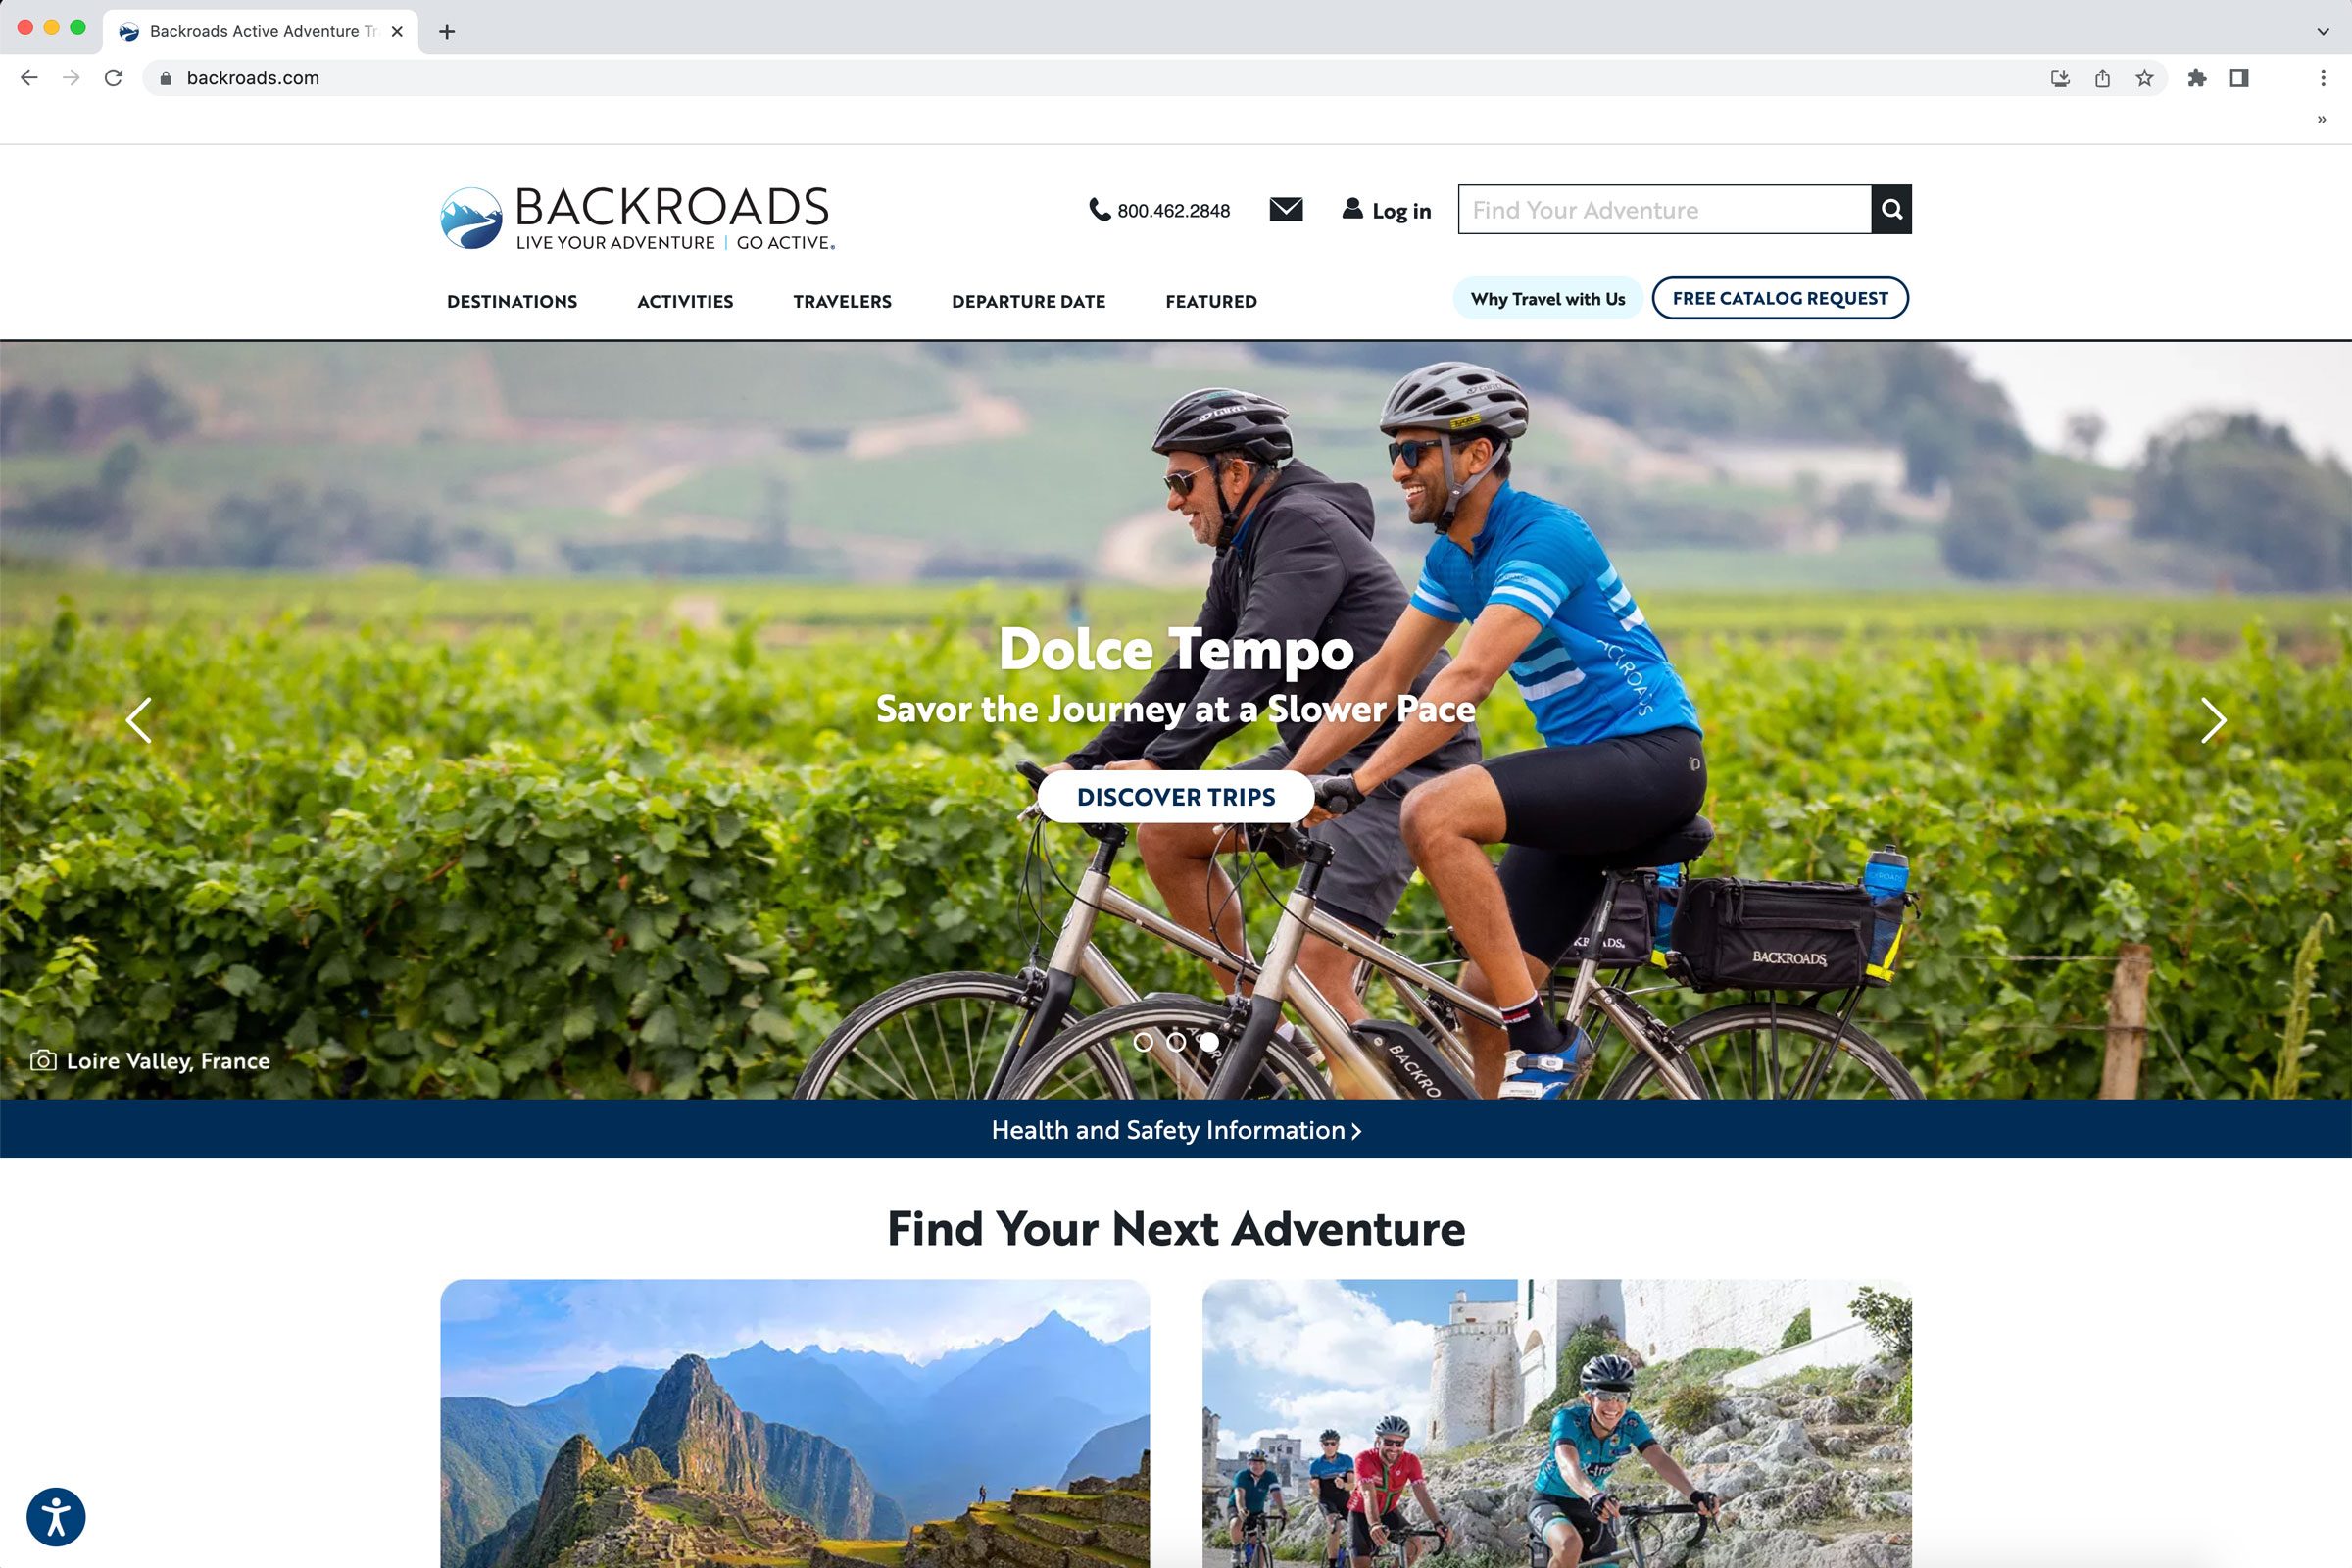 <h3 class=""><strong>Backroads</strong></h3> <h3 class=""><strong>Sample trip: Bordeaux Bike Tour</strong></h3> <p>If you like active vacations and exploring the outdoors, then <a href="https://www.backroads.com/" rel="noopener noreferrer">Backroads</a> may be the perfect tour operator for you. They specialize in European itineraries both for adults-only and for families. Backroads also offers "multi-adventure" tours where, say, a <a href="https://www.rd.com/list/best-bike-trail-in-every-state/" rel="noopener noreferrer">biking trip</a> in Spain will also offer surfing lessons and kayaking. One mom of two 20-somethings shared, "We've taken four multi-sport trips with Backroads, and each one was phenomenal." The trip I have on my dream board is the "Bordeaux & Dordogne Bike Tour," which includes stops at "grand wine estates" and Michelin-star restaurants, a perfect blend of calorie consumption and exercise.</p> <p><strong>Pros:</strong></p> <ul> <li>Range of bicycles available, including electric-assist E-bikes</li> <li>Itineraries for couples, friends or solo travelers</li> <li>Itineraries for families with older teens and 20-plus, a rarity</li> <li>"Dolce Tempo" trip options offer an easygoing pace</li> </ul> <p><strong>Con:</strong></p> <ul> <li>Many trips are only offered seasonally, May to October</li> </ul> <p class="listicle-page__cta-button-shop"><a class="shop-btn" href="https://www.backroads.com/">Learn More</a></p>